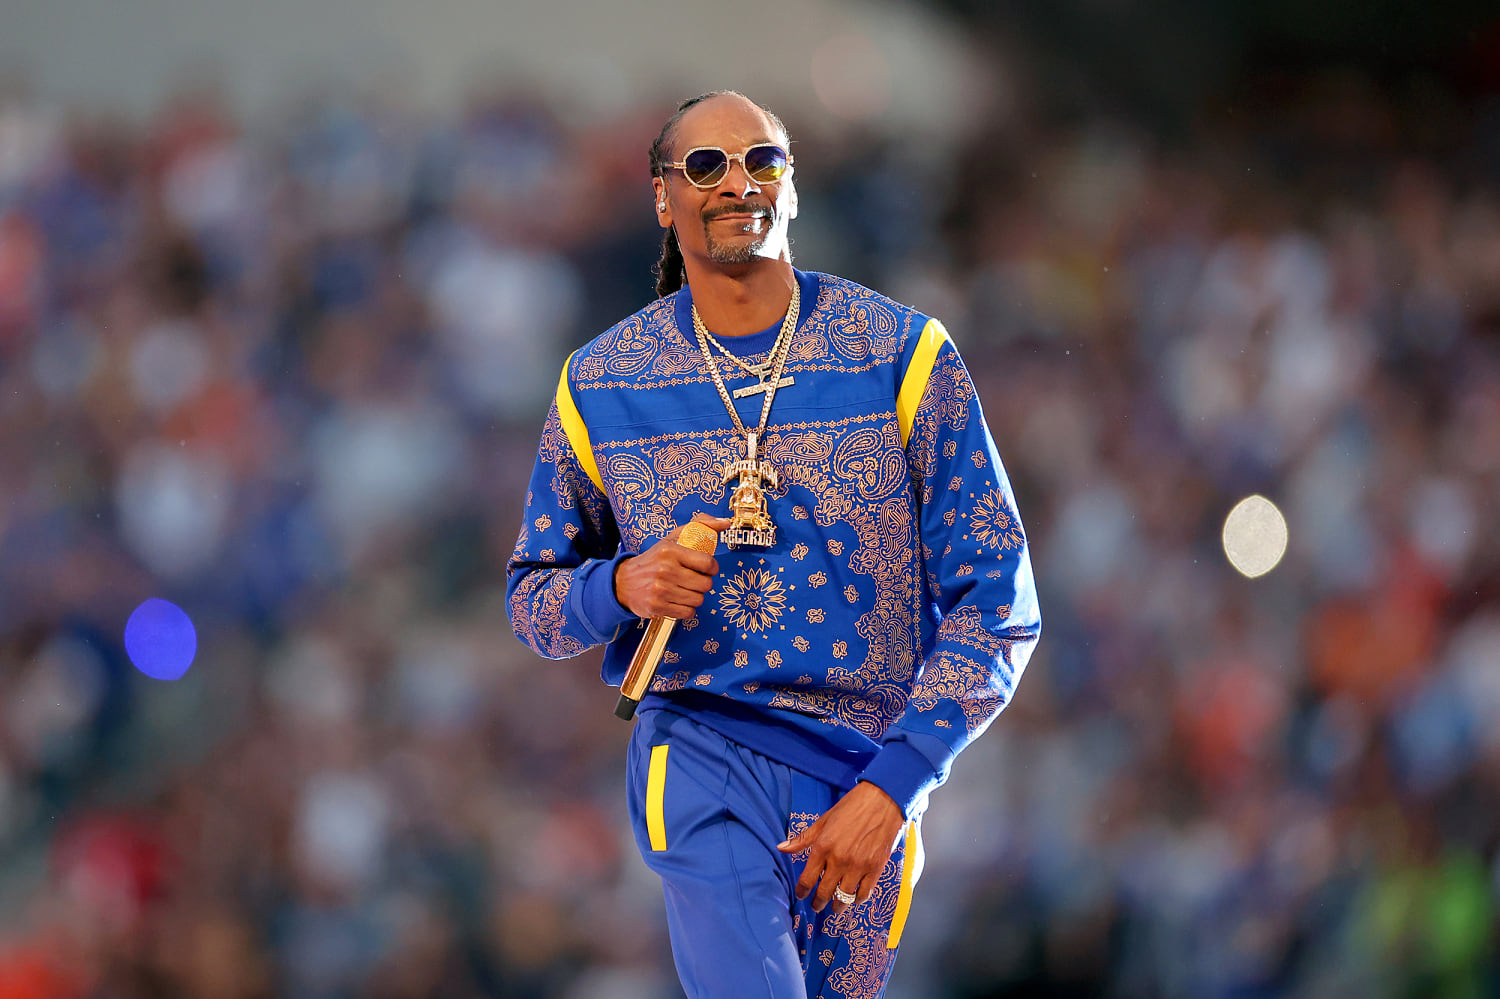 Snoop Dogg is joining NBC's coverage of the 2024 Paris Olympics